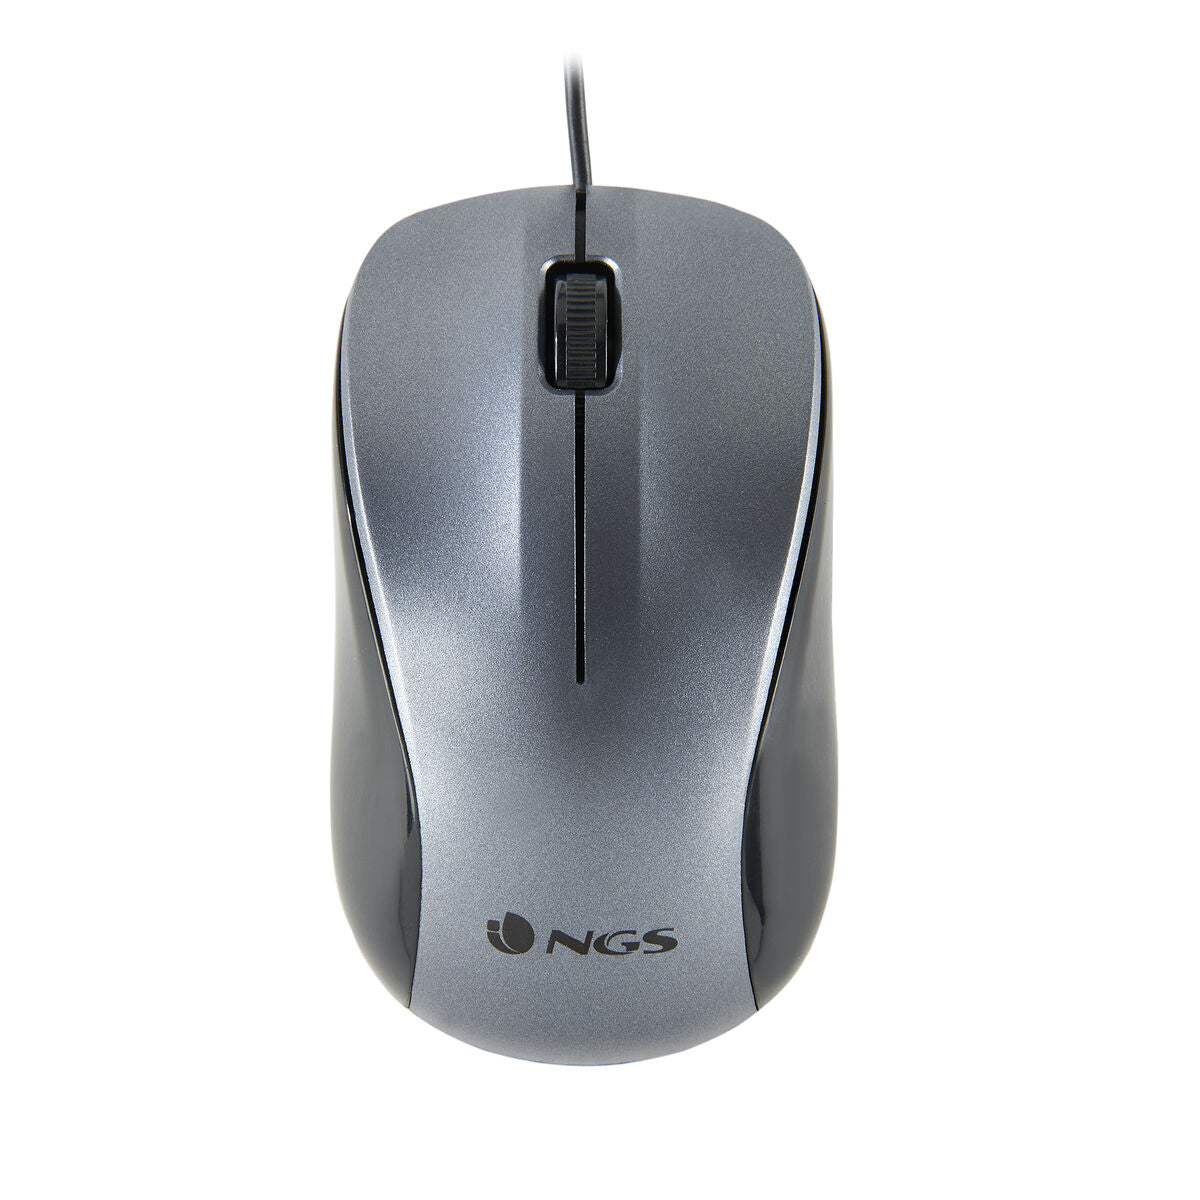 Optisk mus NGS NGS-MOUSE-1091 1200 DPI Grå